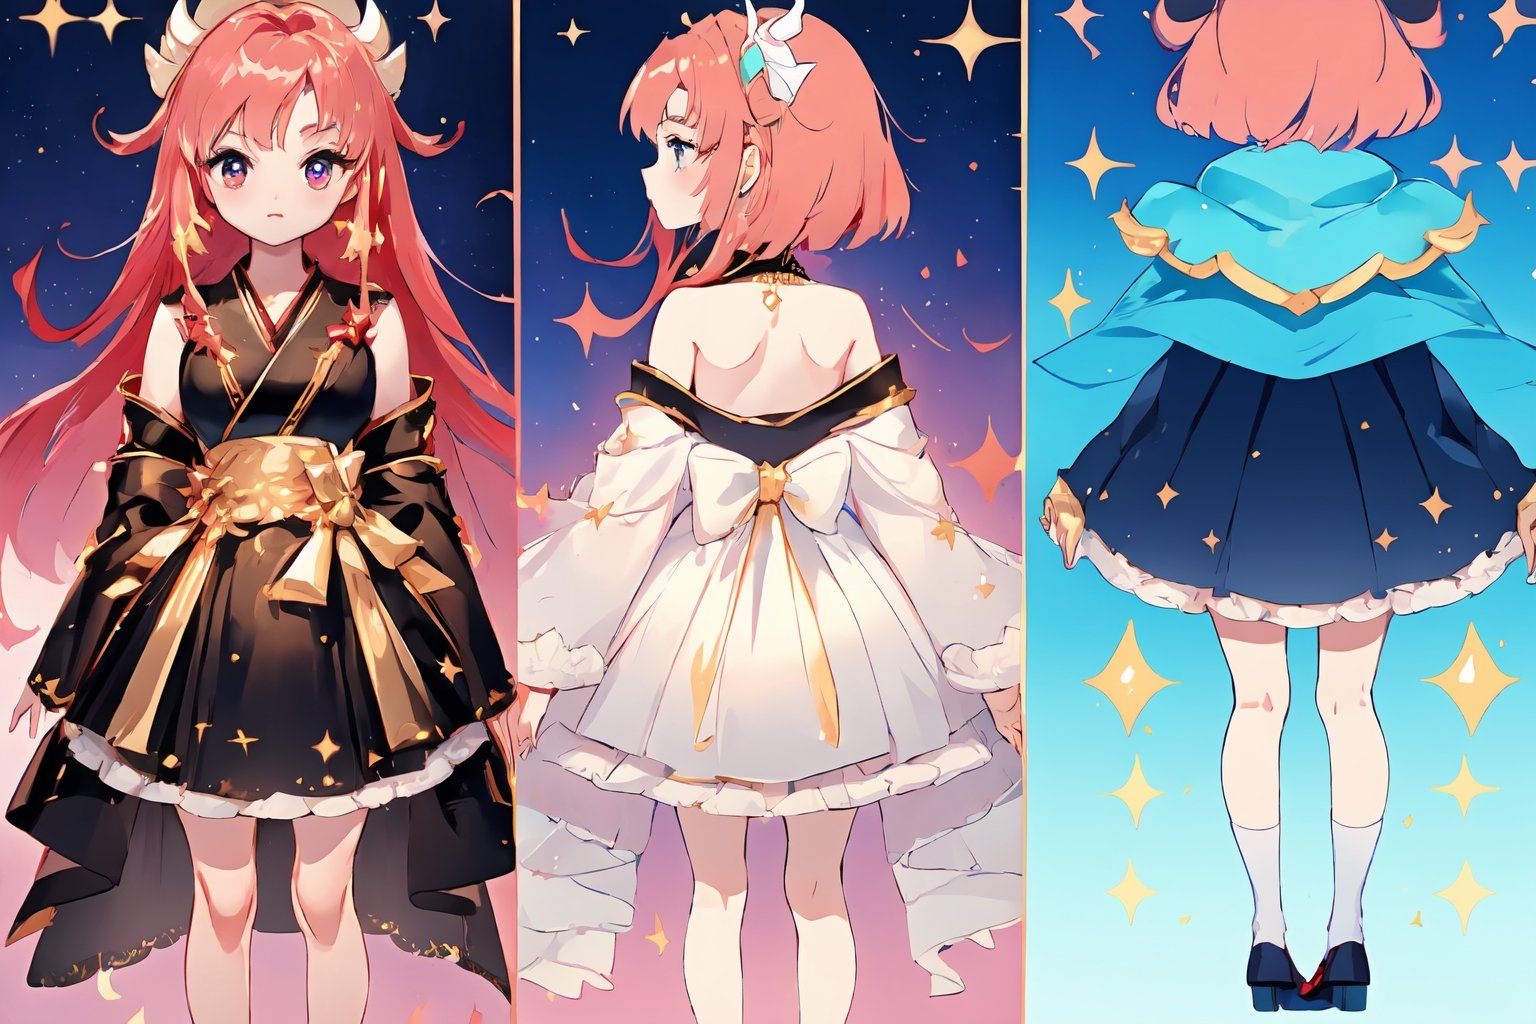 (((((magical girl, crimson hair, medium hair, soft skin, colorful sky background, black kimono with gold trim, moon, fire, swirling fire, stars, shooting stars, holding flute))))), (((((left eye red))))), (((((right eye sky blue))))), ((((heterochromia)))), (masterpiece, best quality:1.2), fluffy, soft, light, bright, sparkles, twinkle, slightly downcast eyes, cute, (crystals), masterpiece, best quality, extremely detailed, Female profile, Delicate features, High resolution, cleavage cutout, large_boobs, ((full_body)),(masterpiece,  best quality:1.2),  fluffy,  soft,  light,  bright,  sparkles,  twinkle,  slightly downcast eyes,  cute,  pink,  purple,  crystals,,,,kawaiitech, ((((character sheet)))),(((((chibi, loli,lolita))))), ((((small legs, chibi legs, short legs)))),,(((Kanna Kamui)))